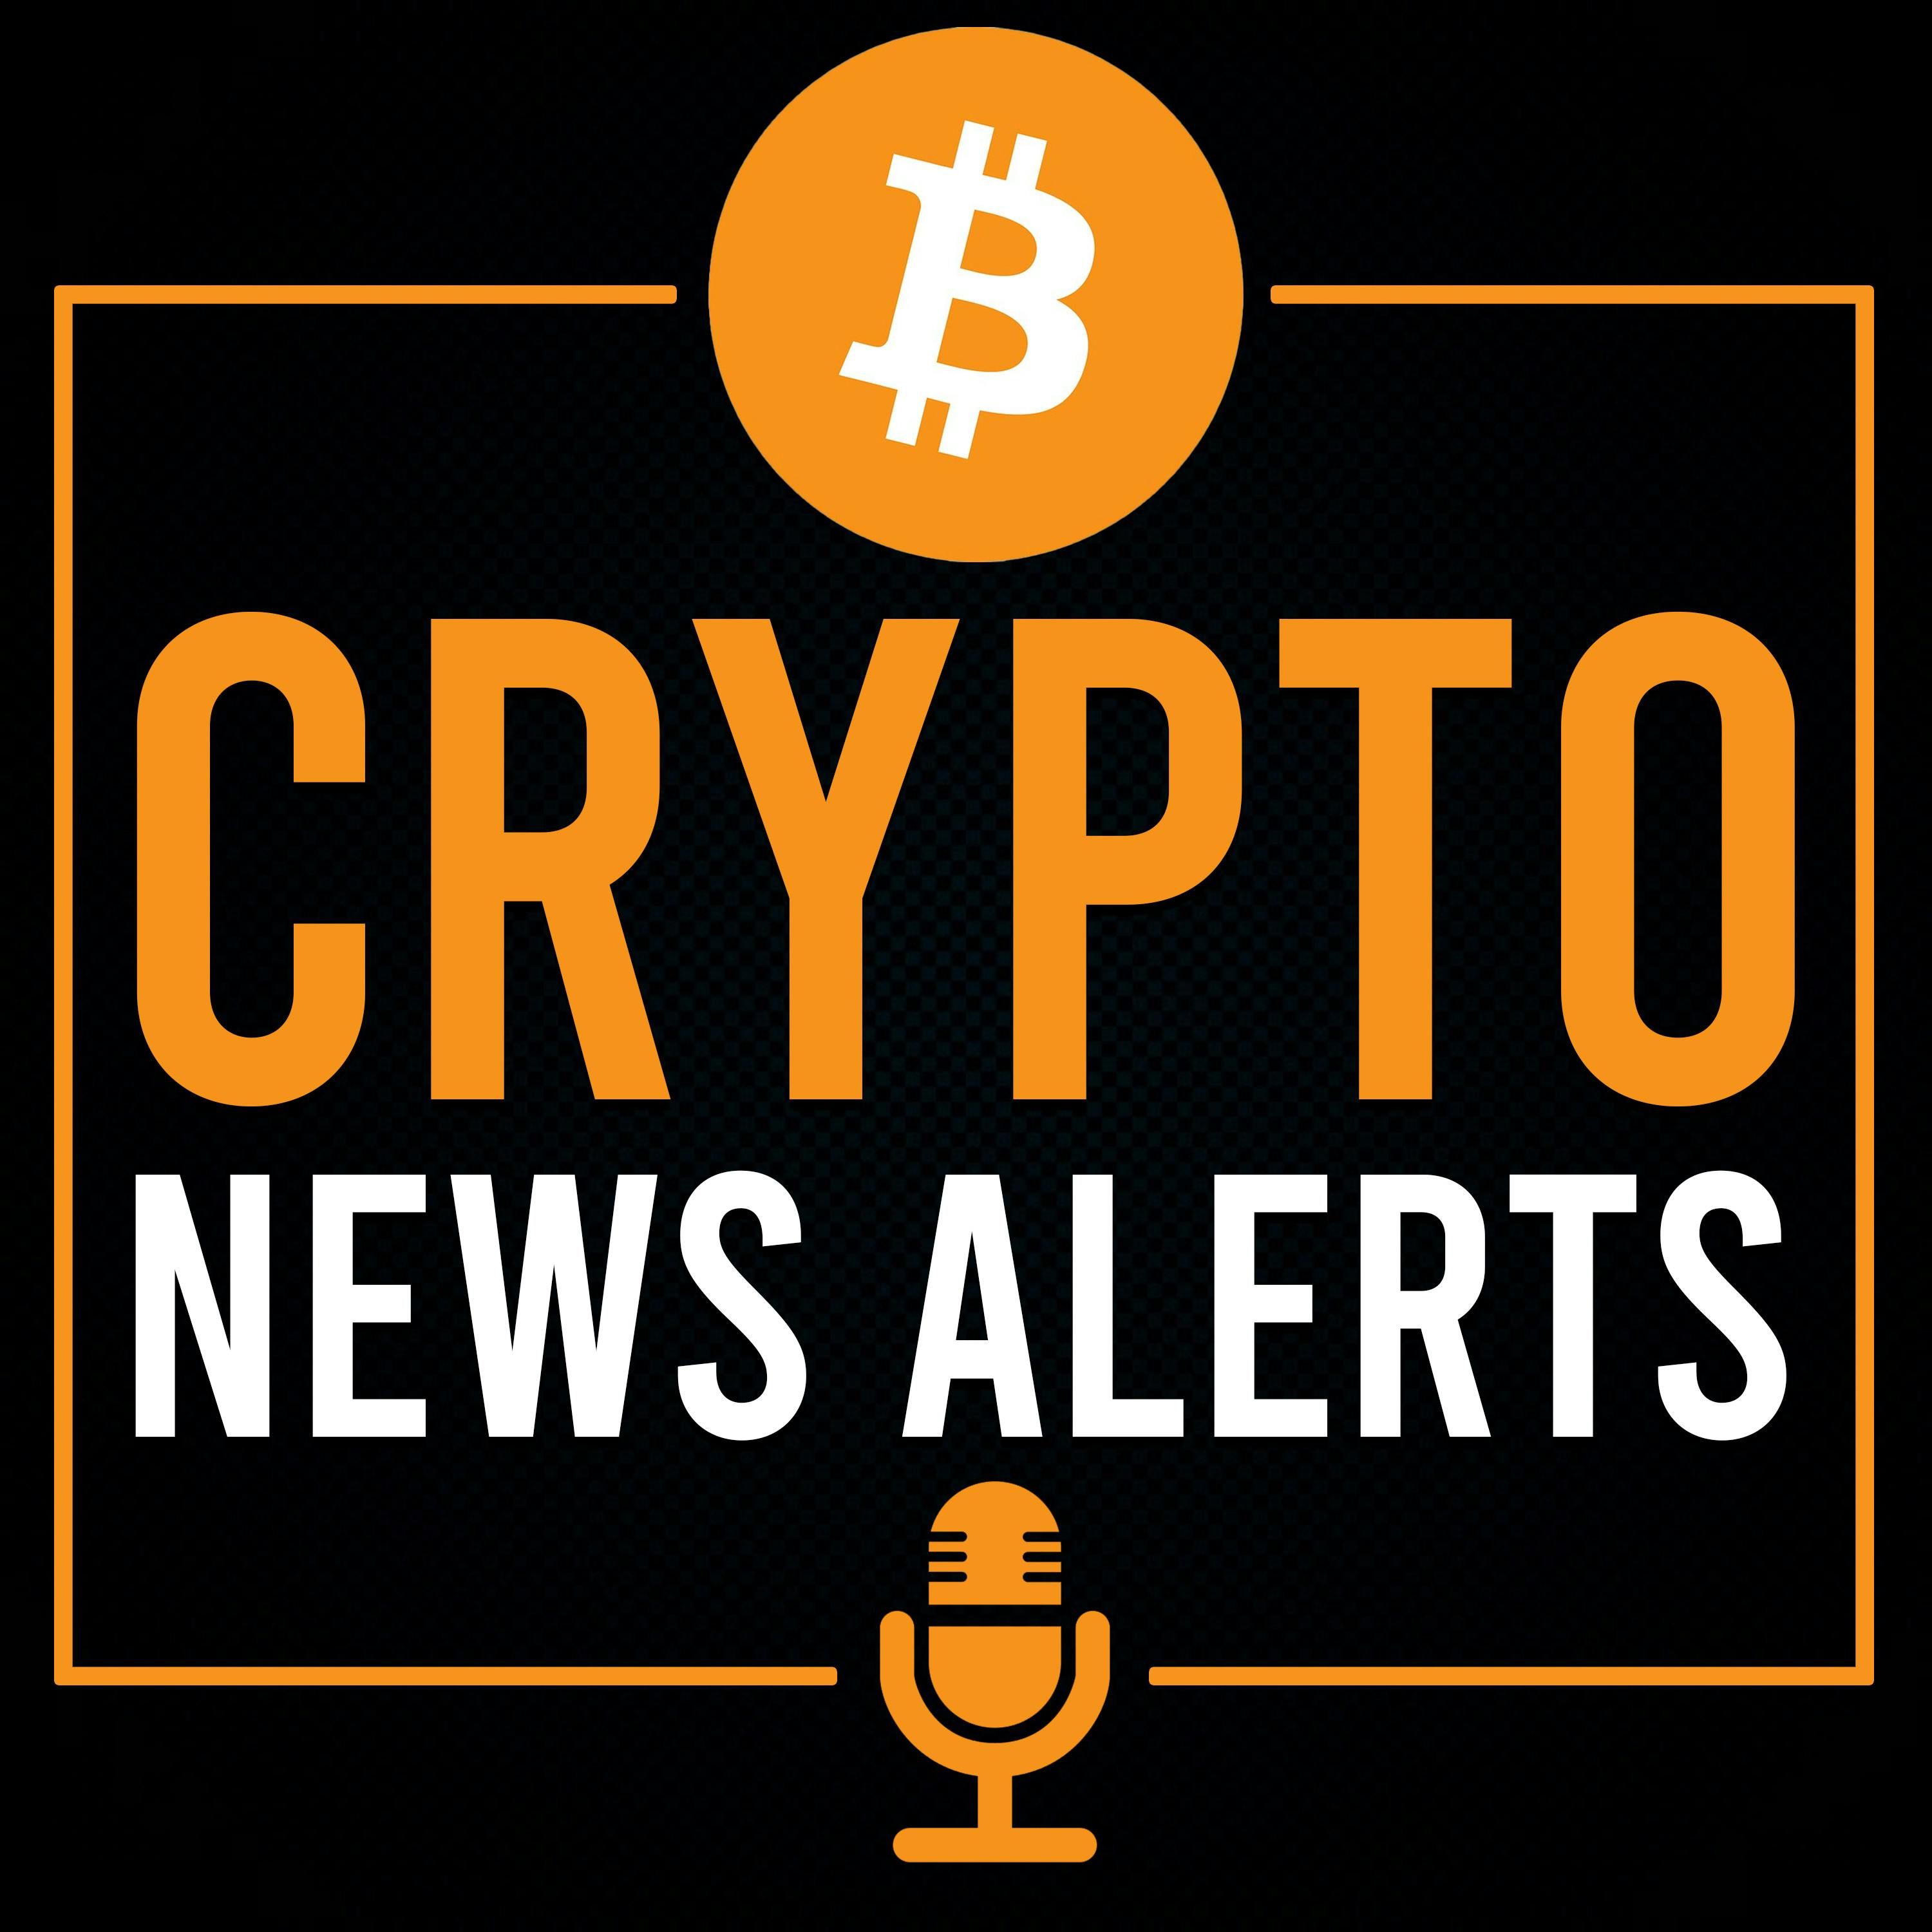 912: TOP CRYPTO ANALYST PREDICTS HUGE BITCOIN RALLY SAYS CURRENT CORRECTION DESIGNED TO SHAKE OUT TRADERS